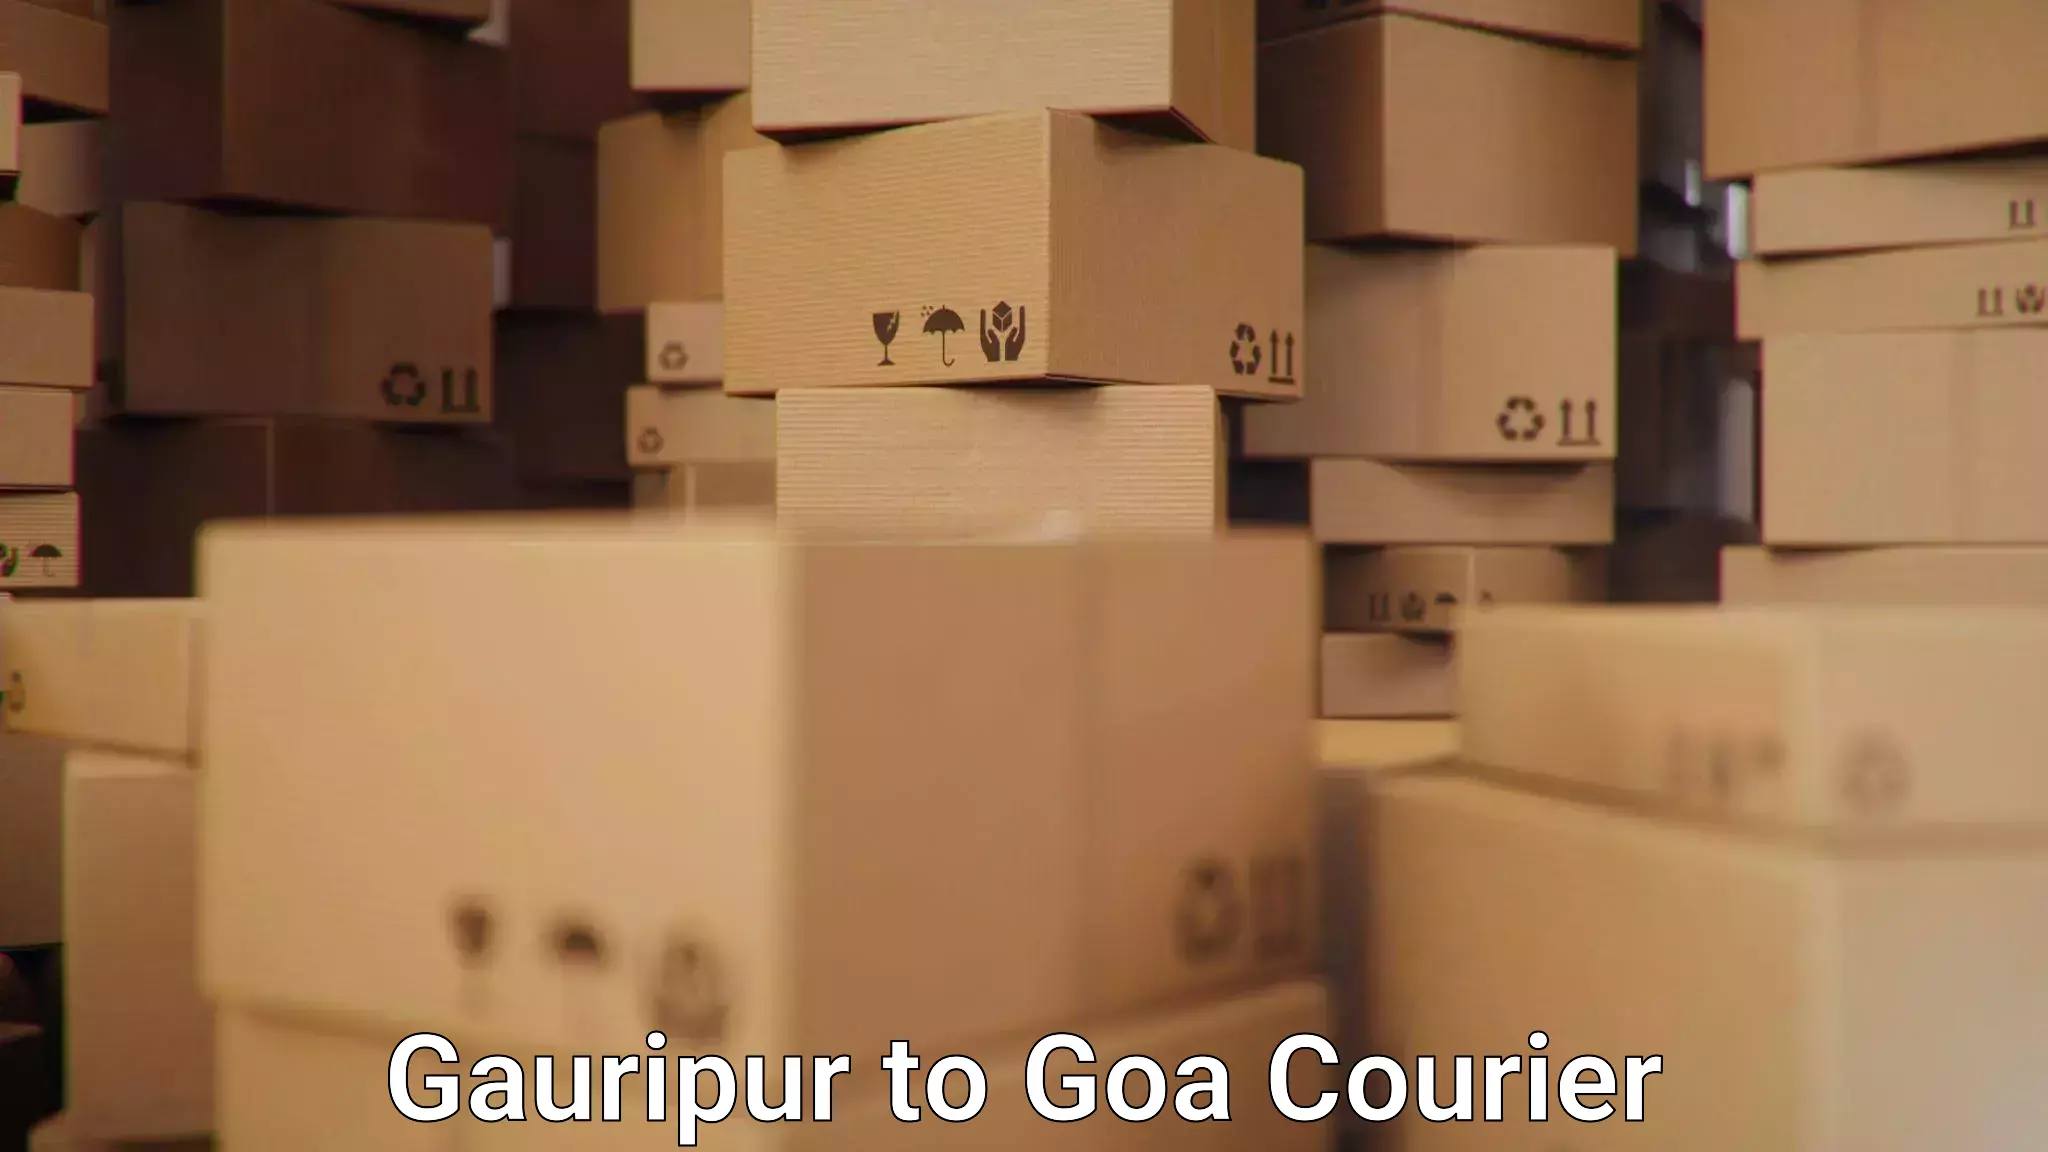 Package delivery network Gauripur to Goa